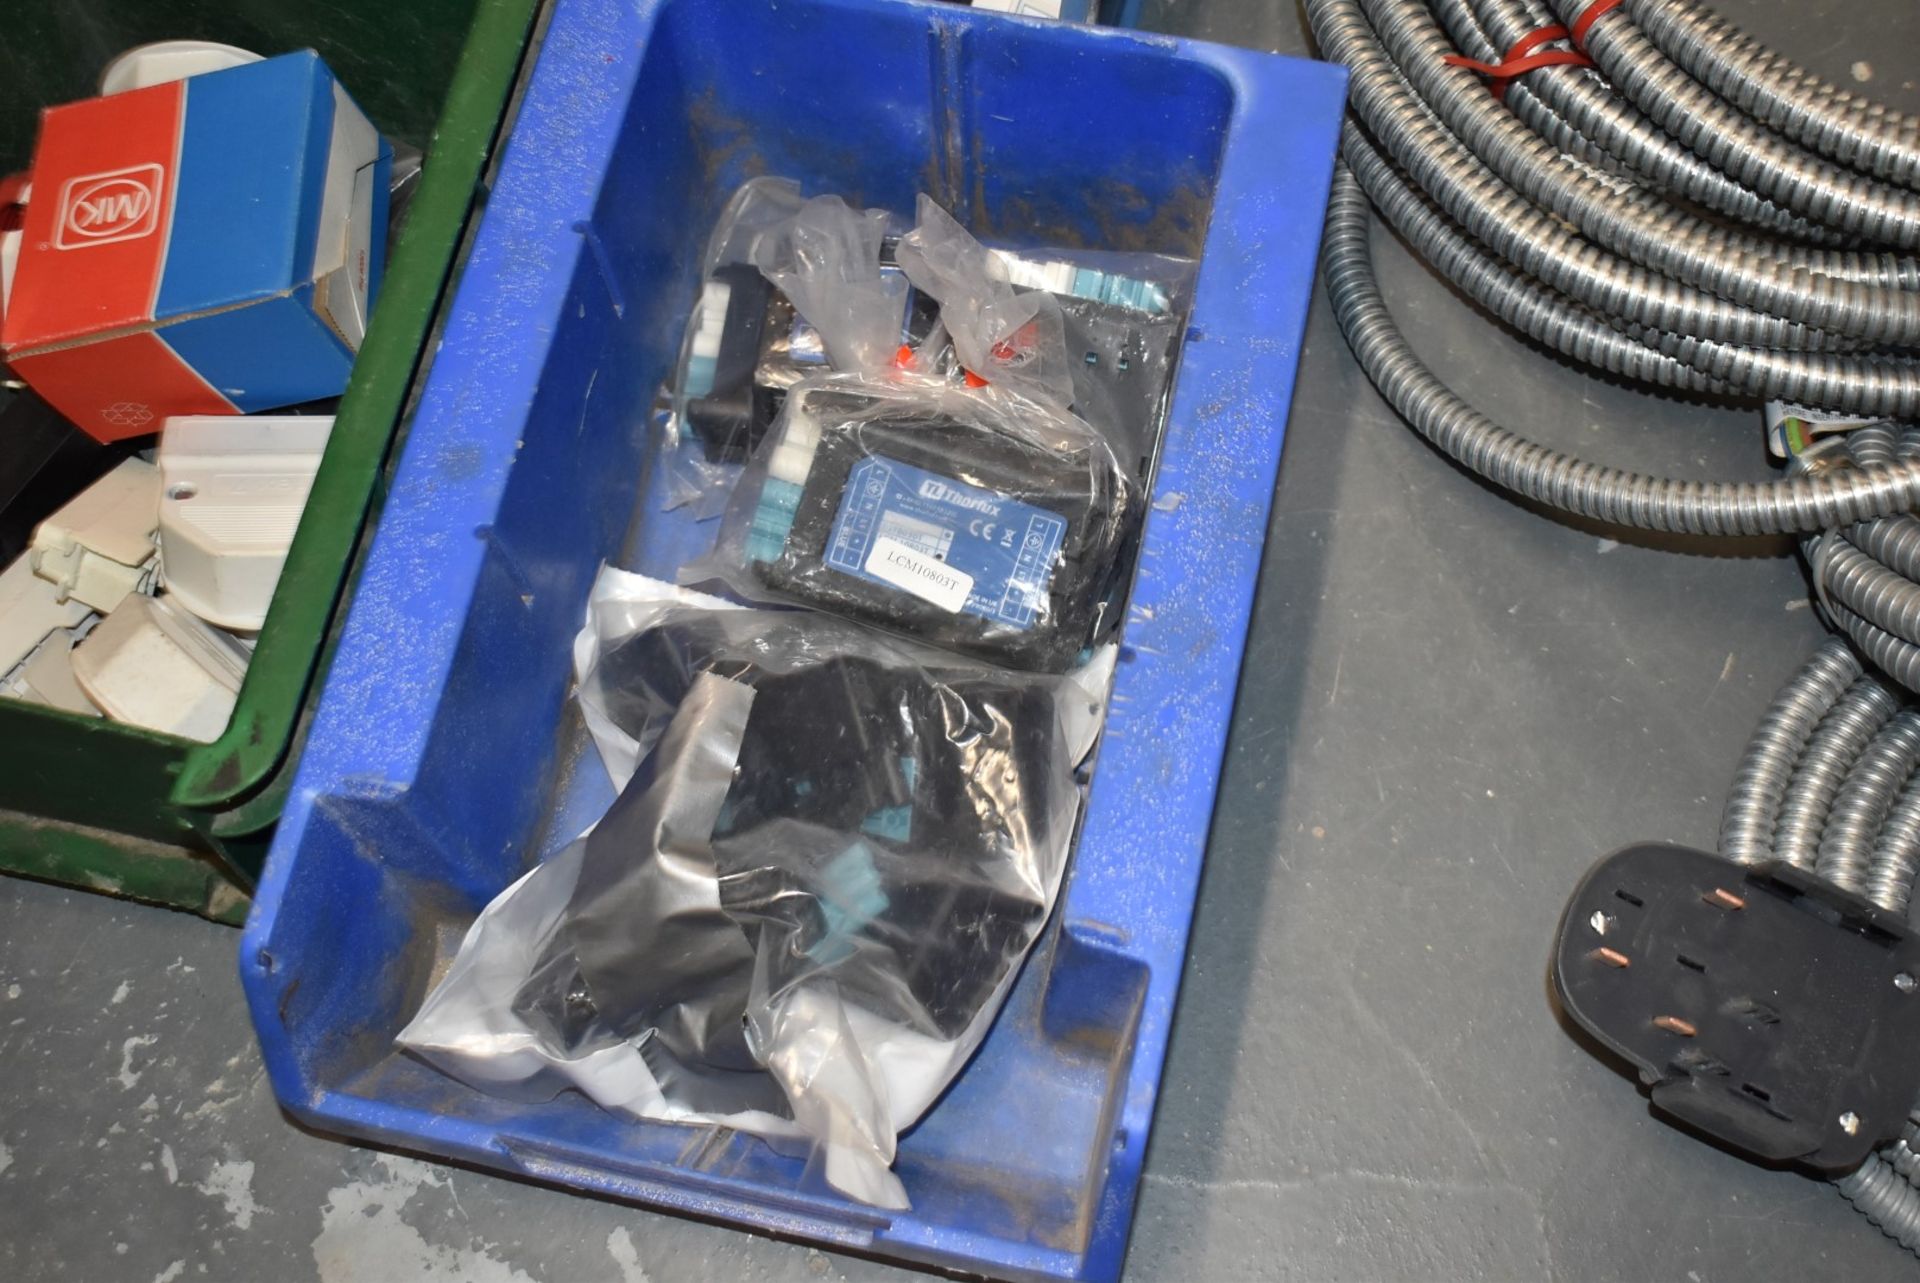 1 x Job Lot Of Assorted Electrical Components - Ref: C654 - CL816 - Location: Birmingham, B45 - Image 8 of 19